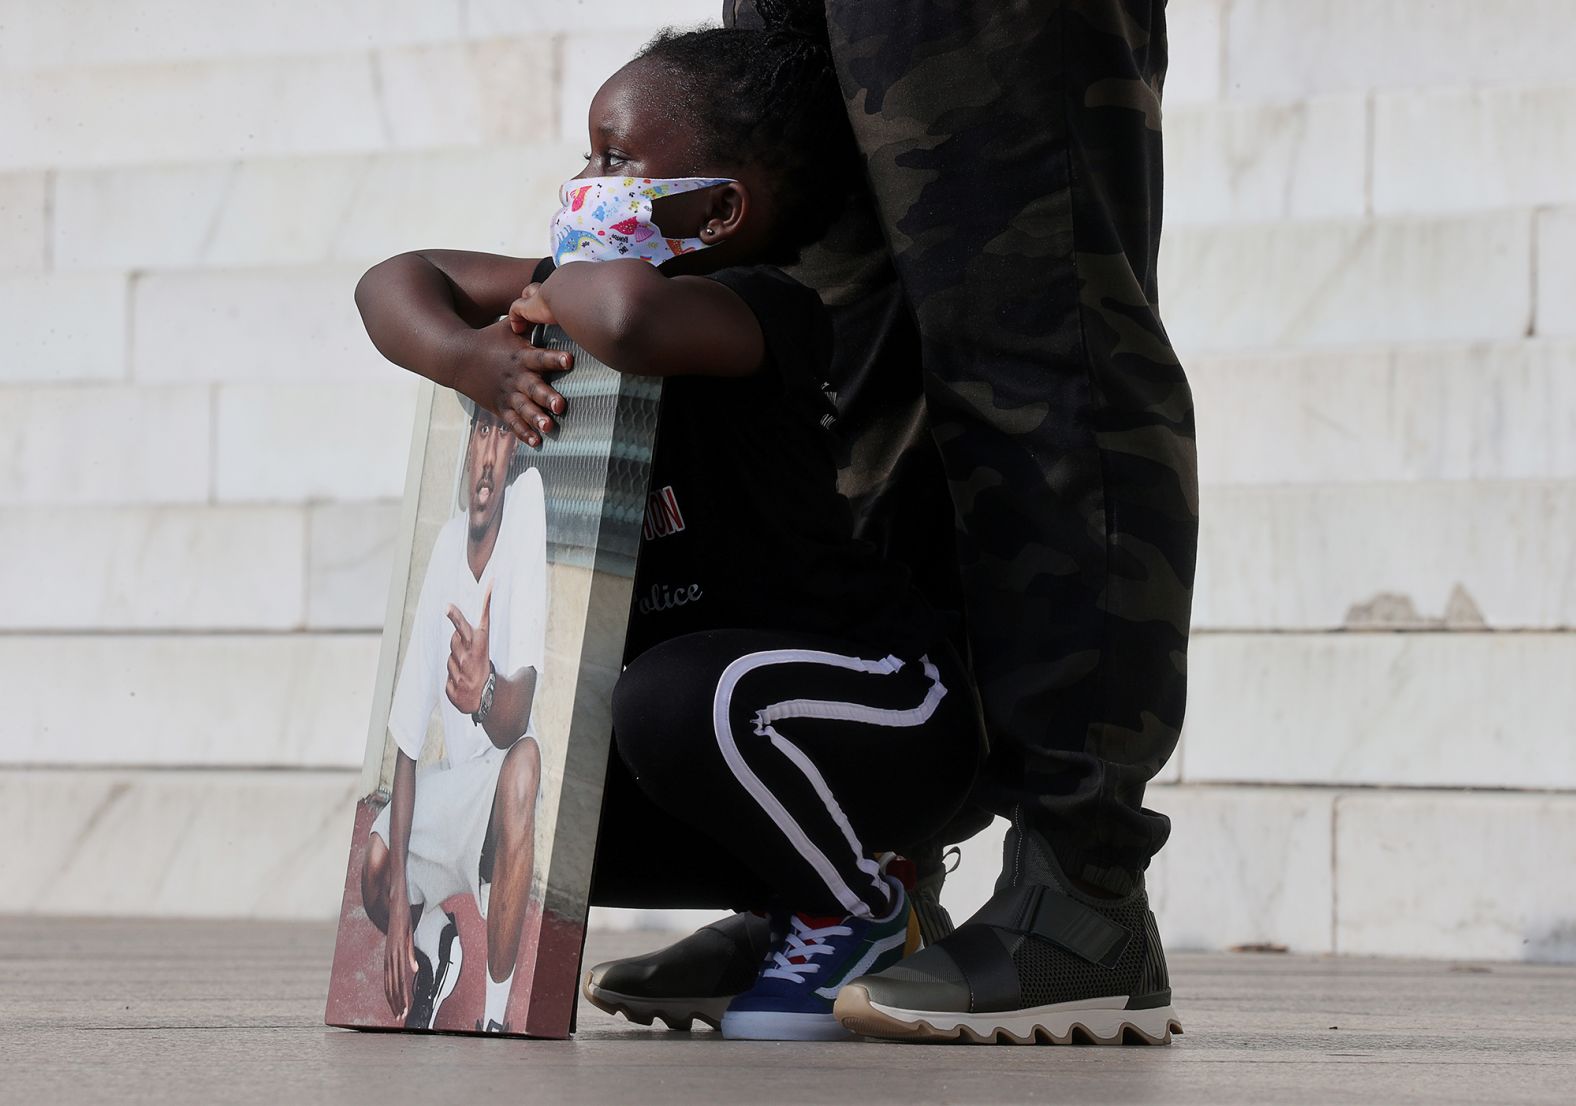 The 4-year-old daughter of Marqueese Alston, who was shot and killed by Washington's Metropolitan Police on June 12, 2018, holds a photograph of her father as demonstrators gather at the Lincoln Memorial.